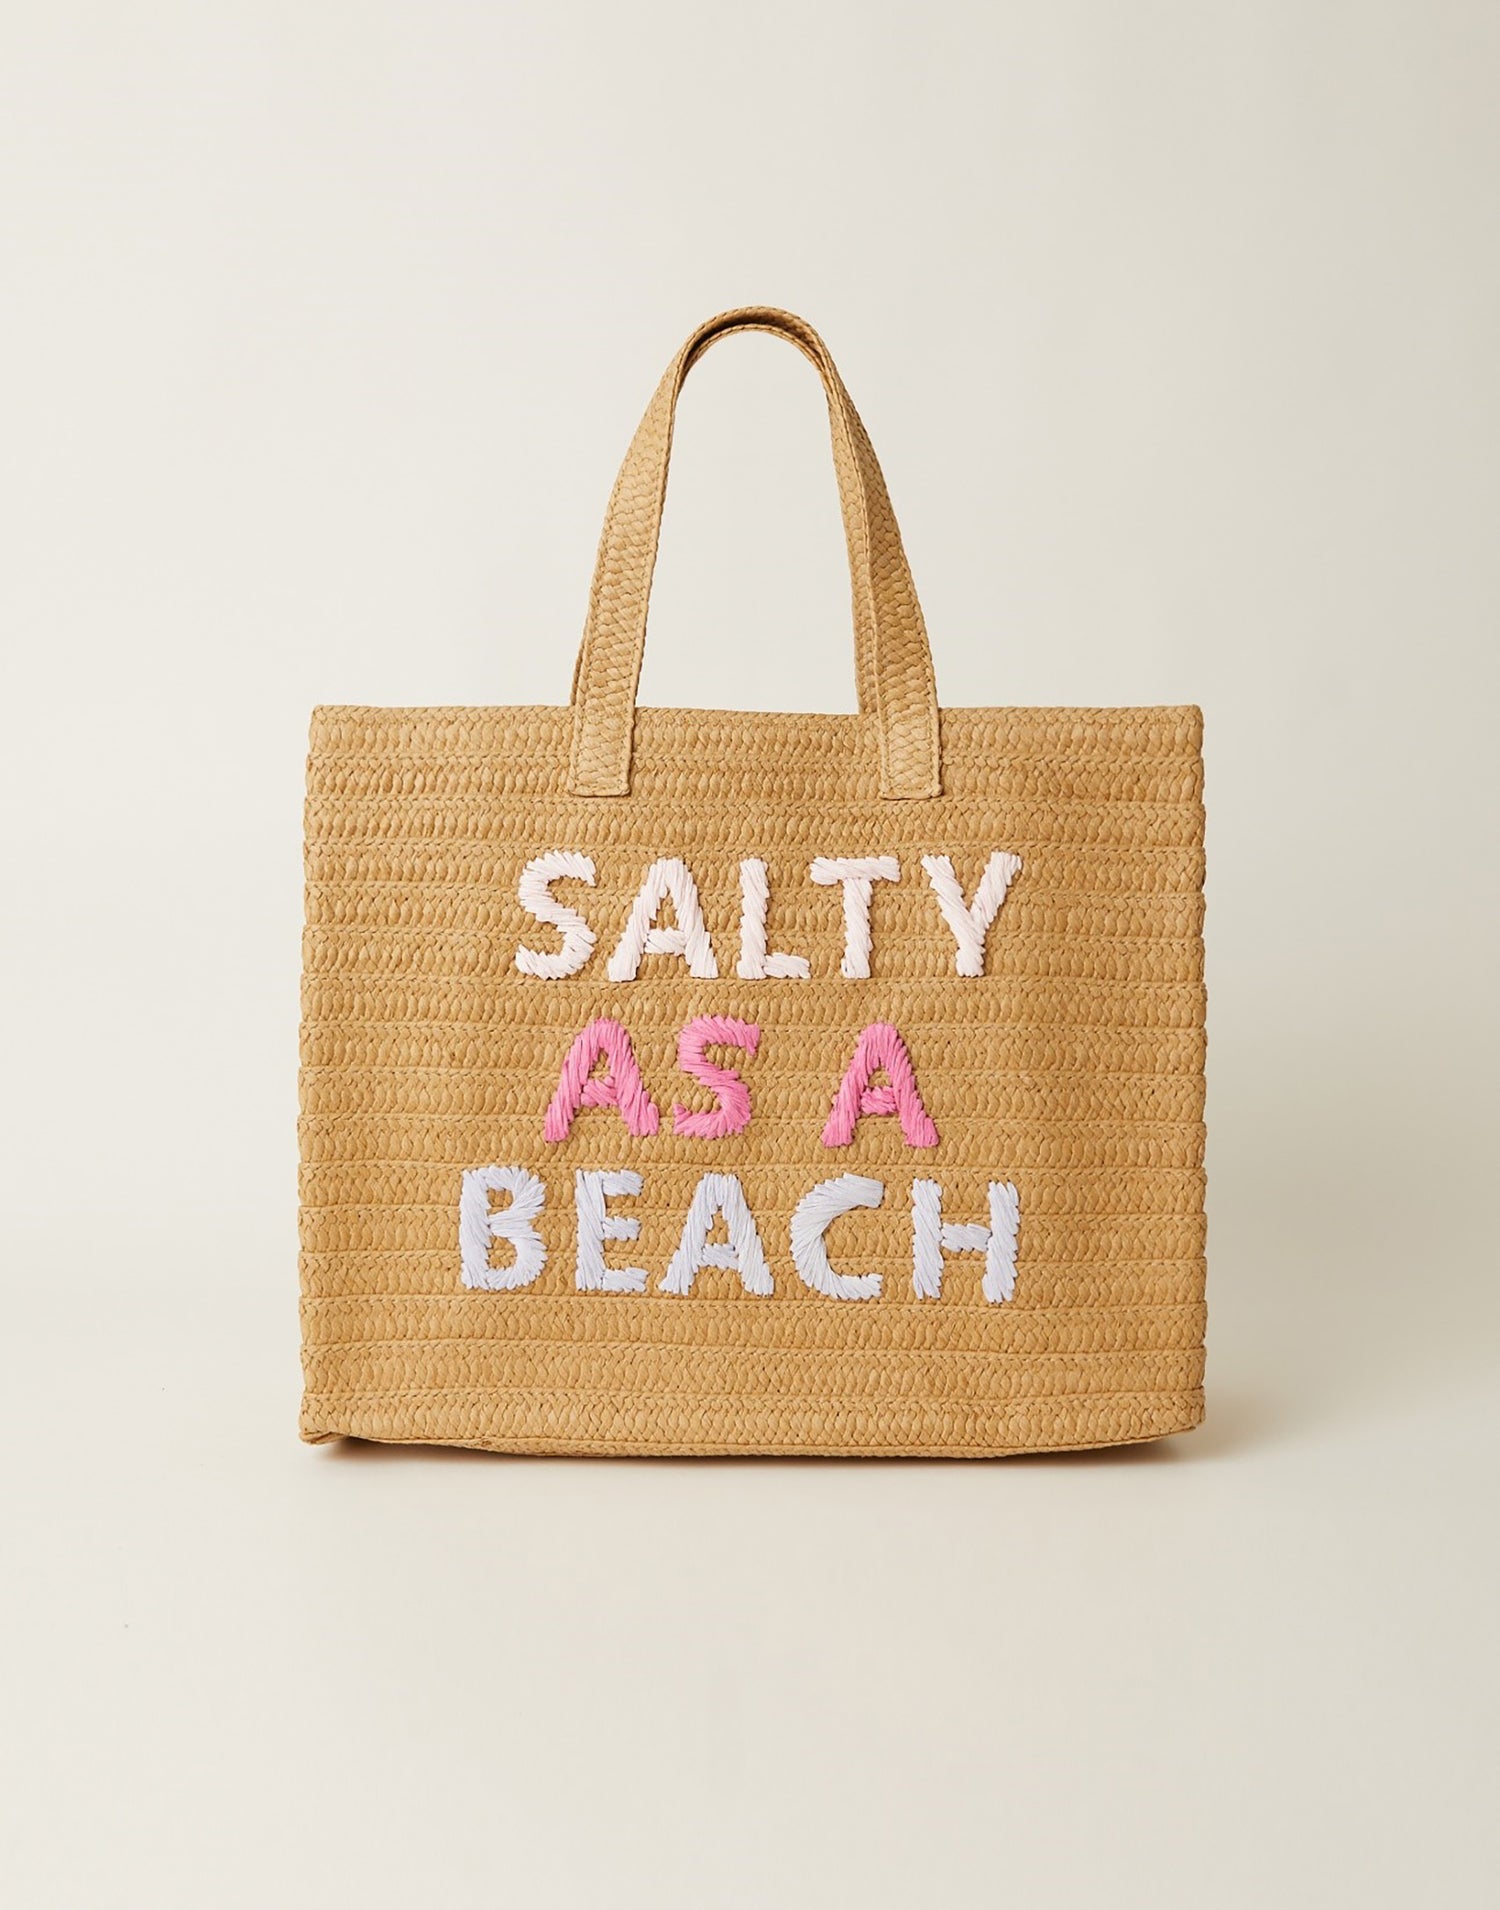 Salty As A Beach Tote by BTB Los Angeles in Pink Rainbow - Front View